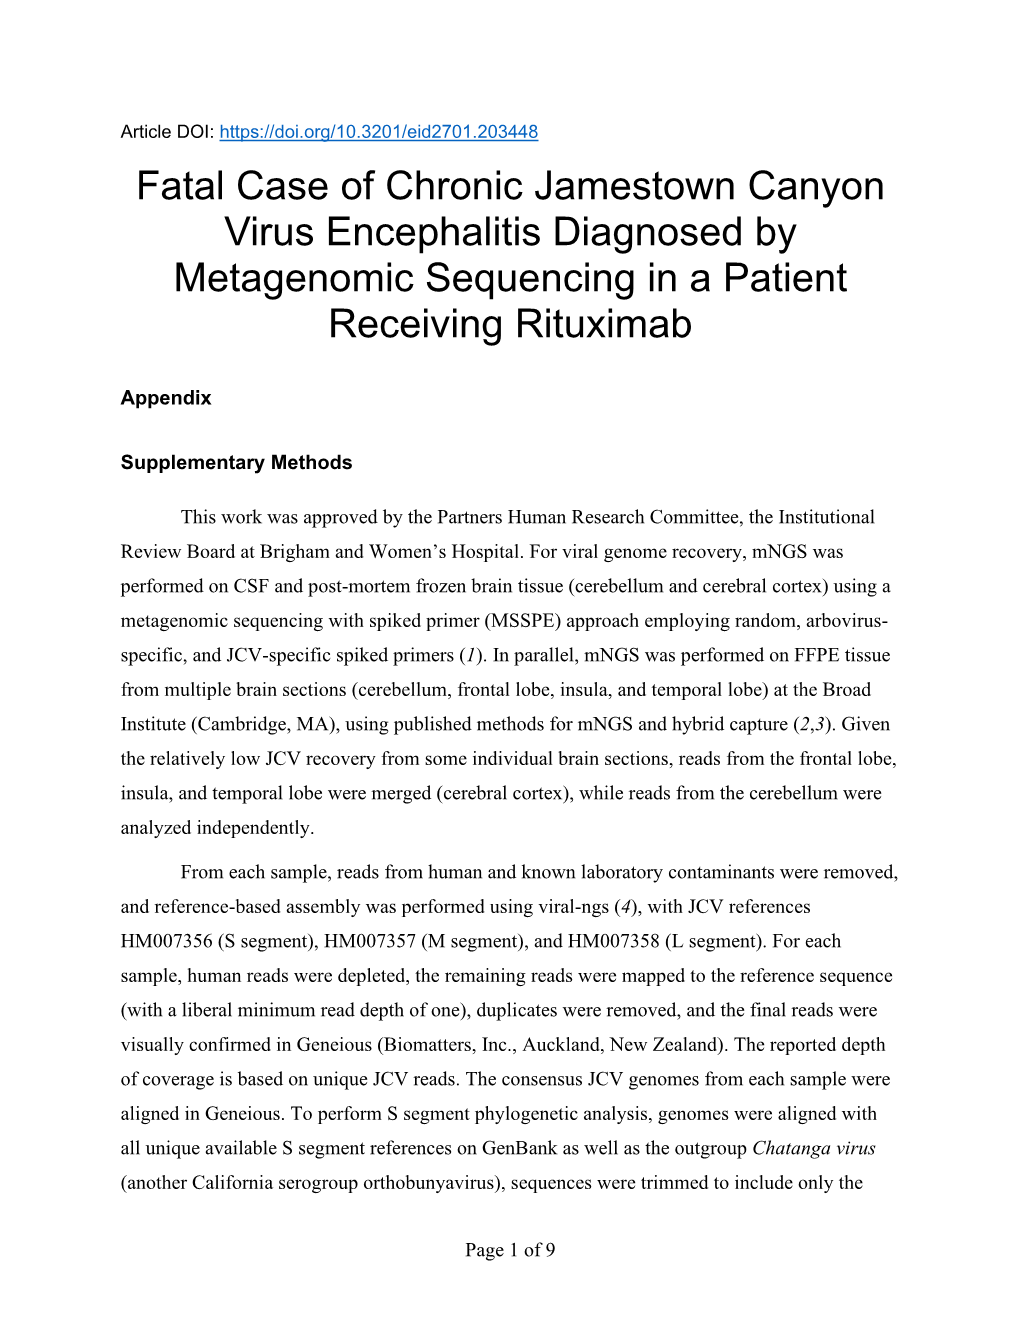 Fatal Case of Chronic Jamestown Canyon Virus Encephalitis Diagnosed by Metagenomic Sequencing in a Patient Receiving Rituximab